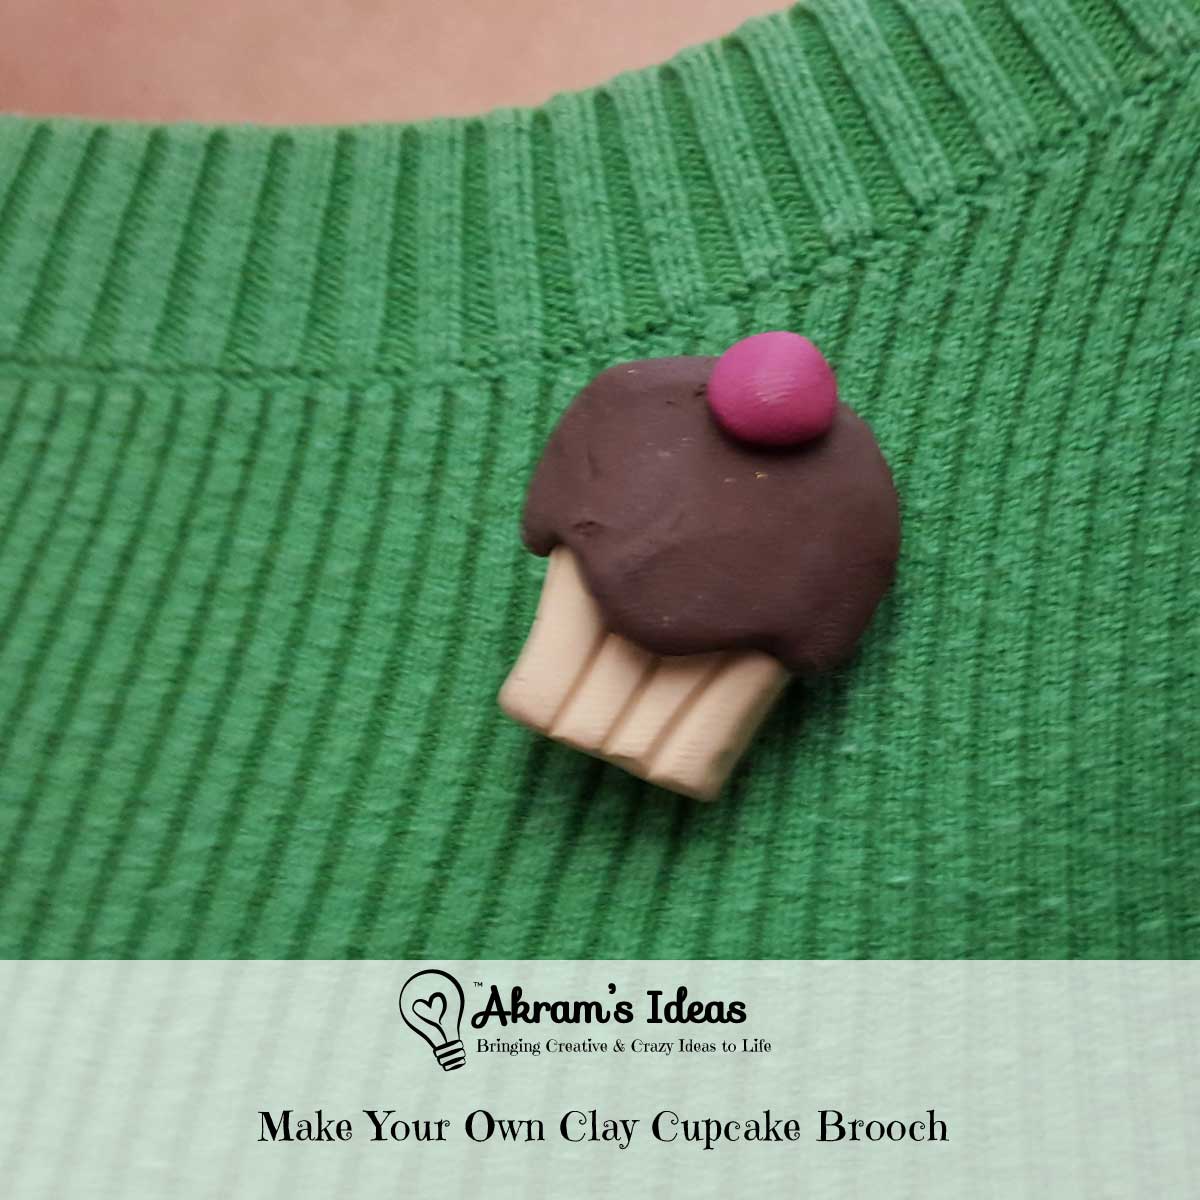 Akram's Ideas: Make Your Own Clay Cupcake Brooch